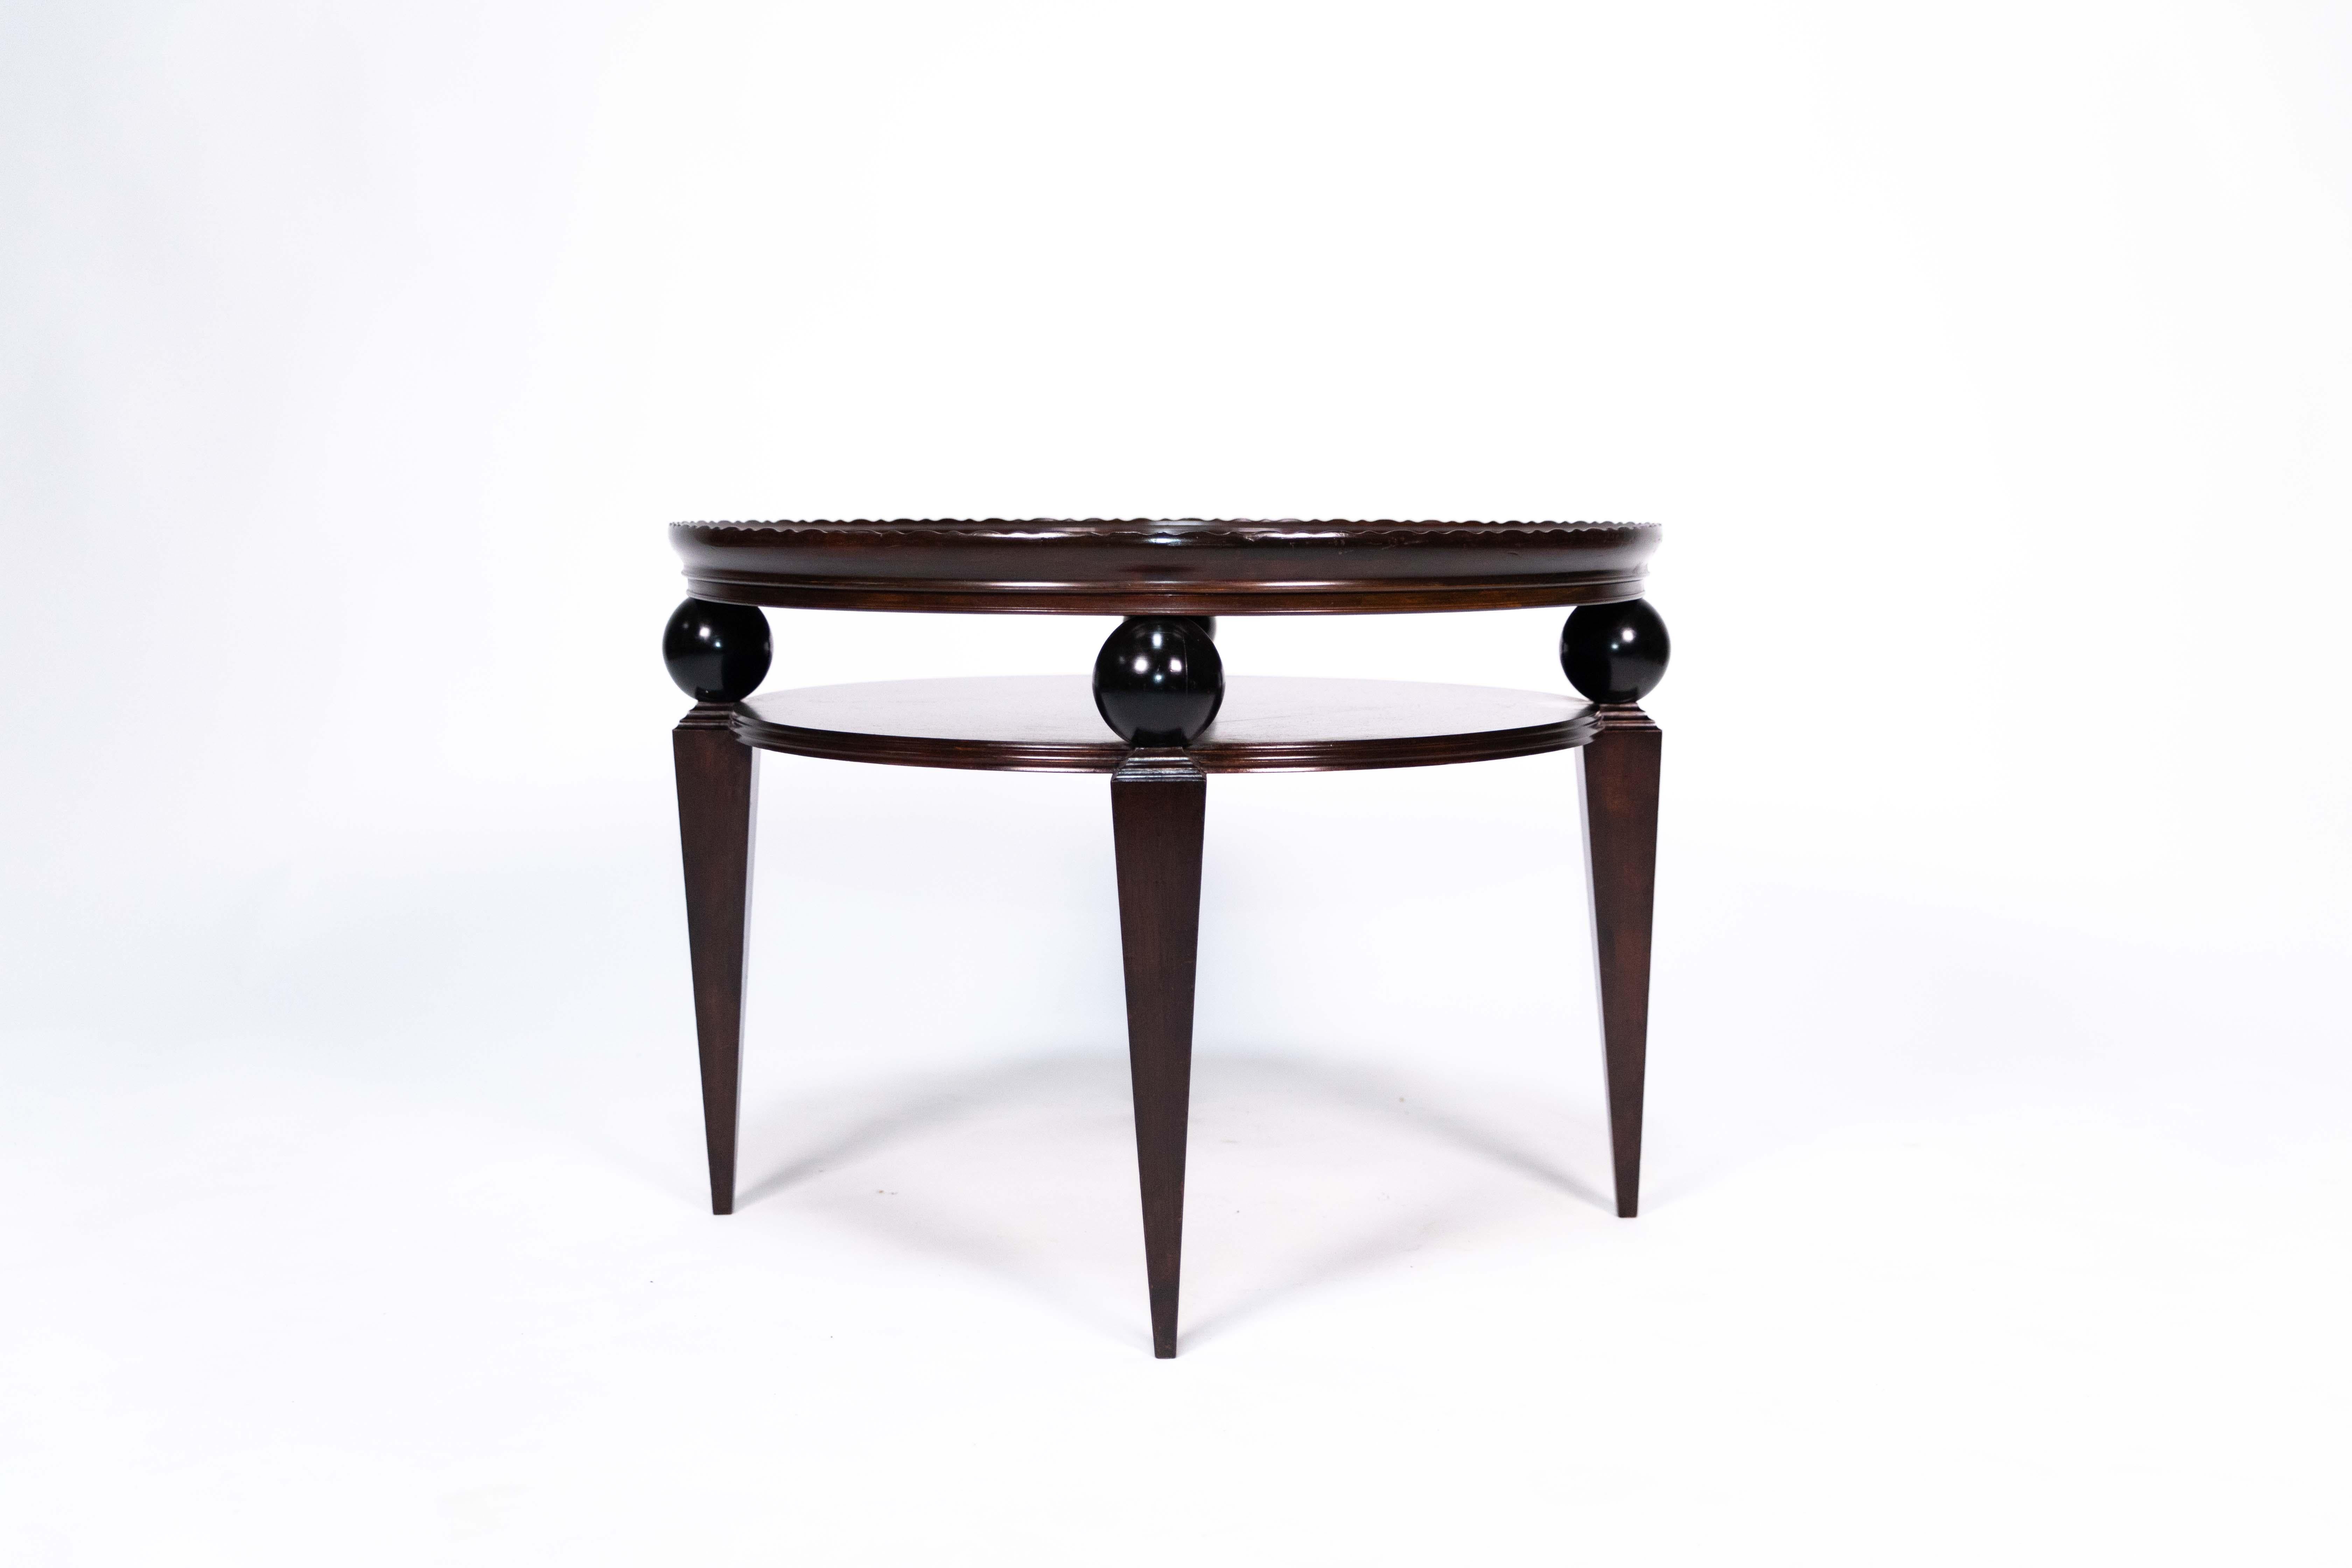 Wood Expressive Coffee Table, Attributed to Dr. Oskar Wlach, 1923 For Sale